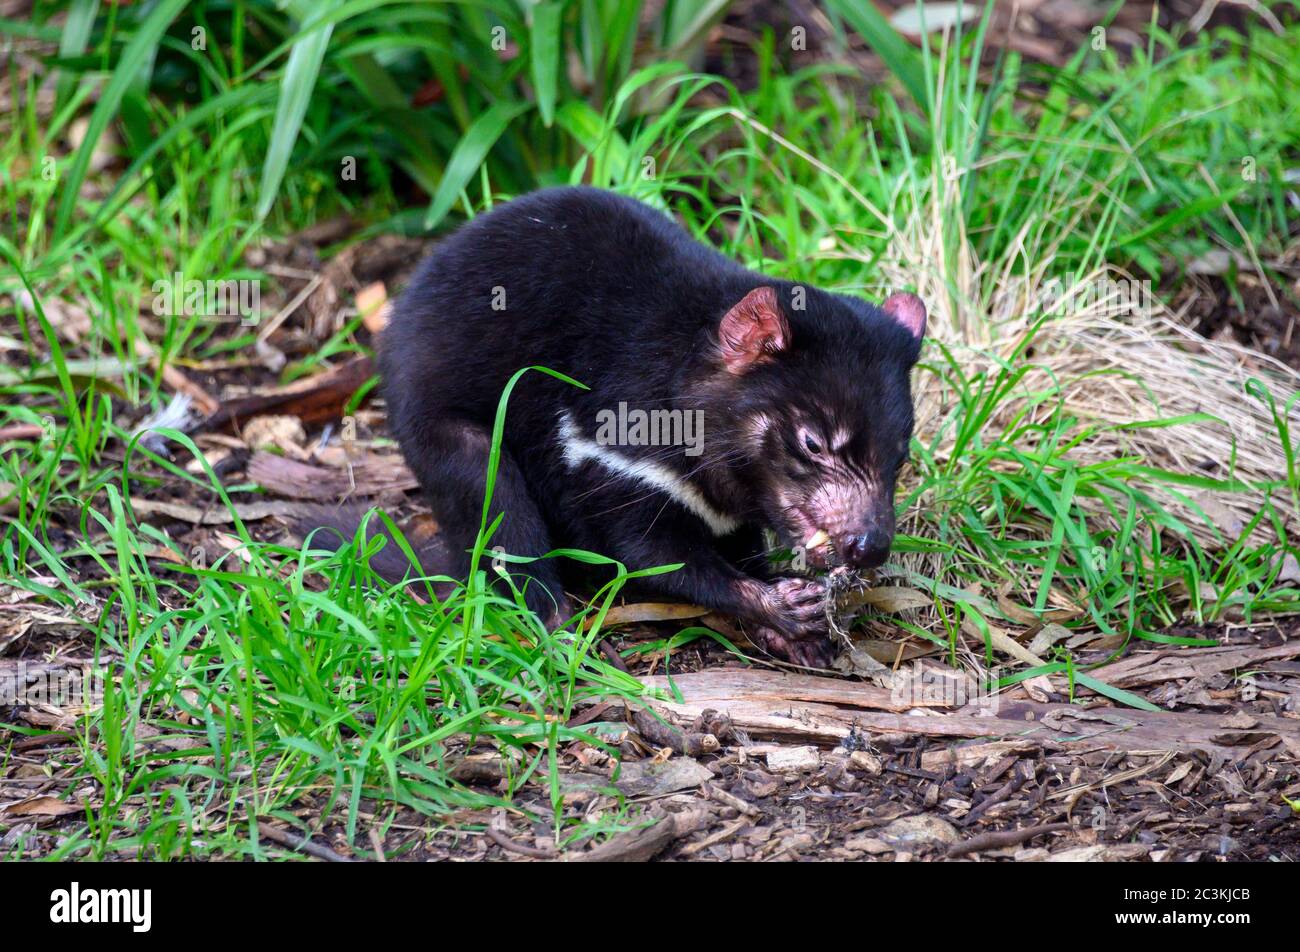 Tasmanian Devil snacking on his meal Stock Photo